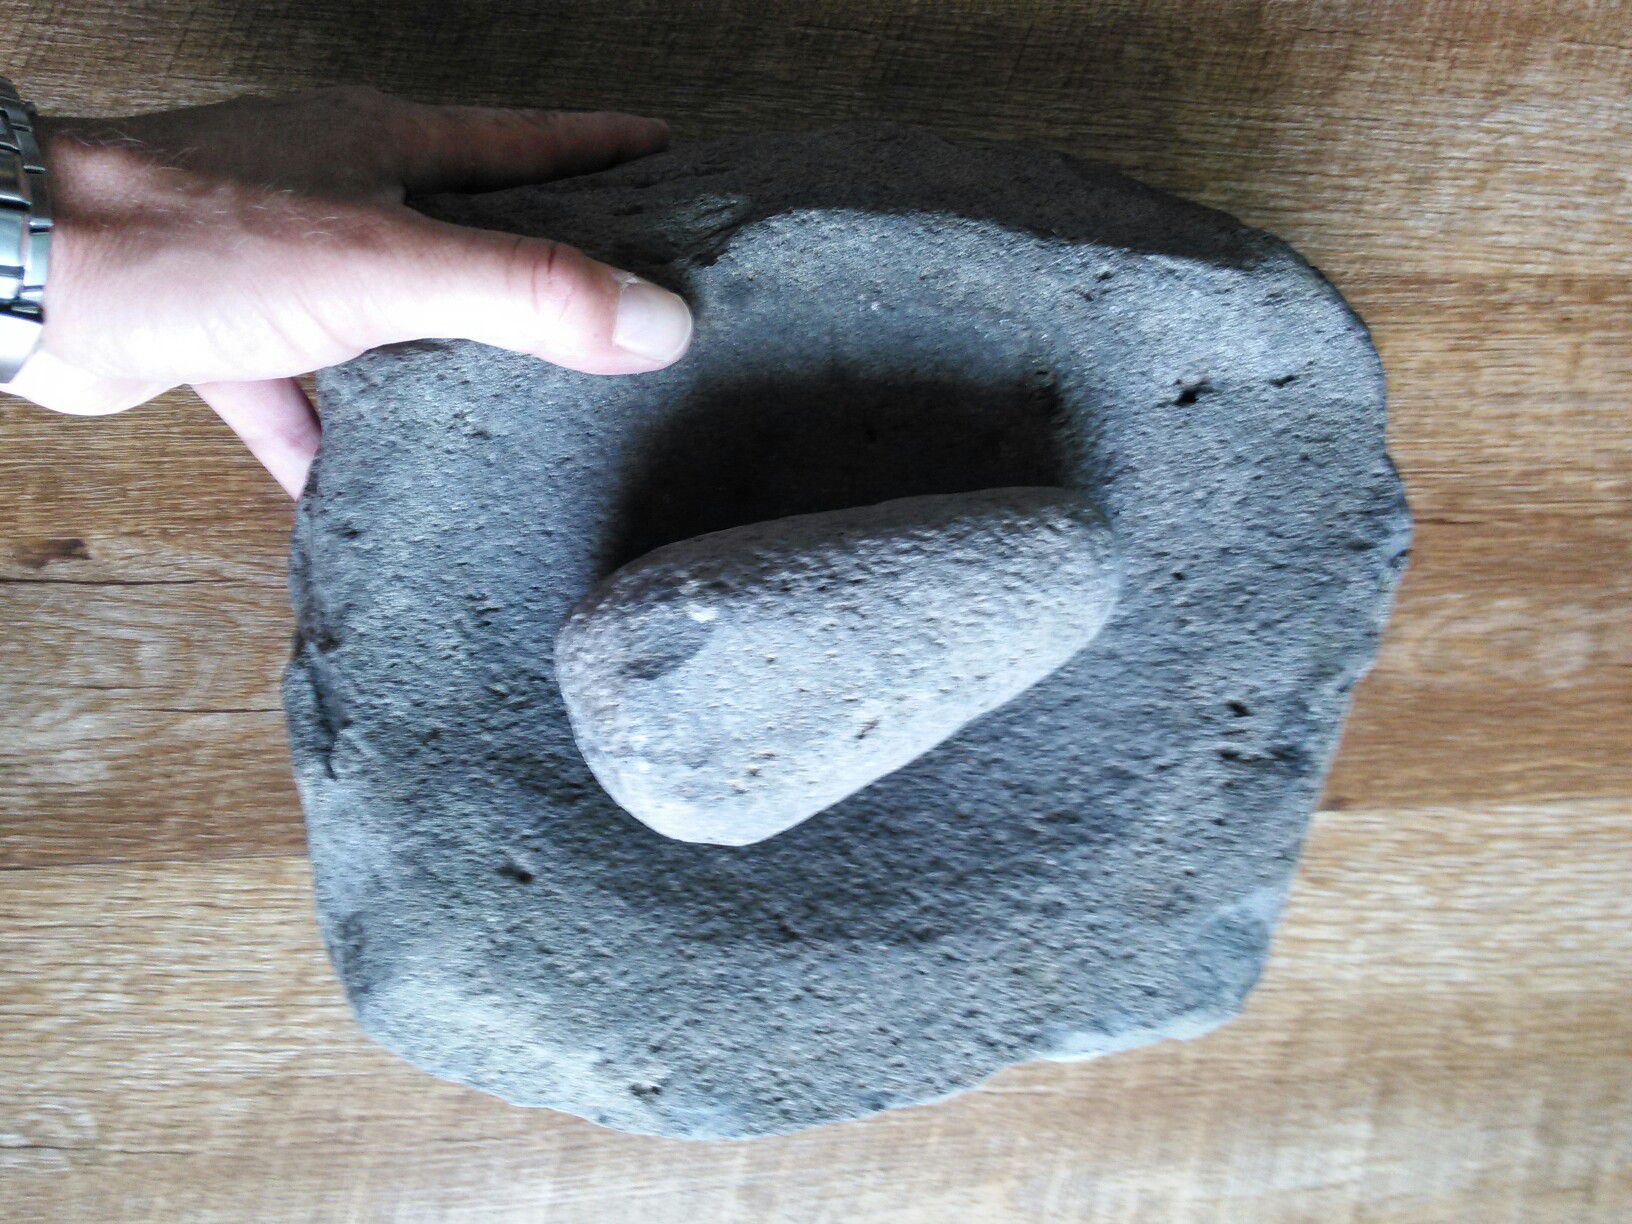 Tillage- Handcrafted Traditional Oval Natural Stone Mortar Pestle